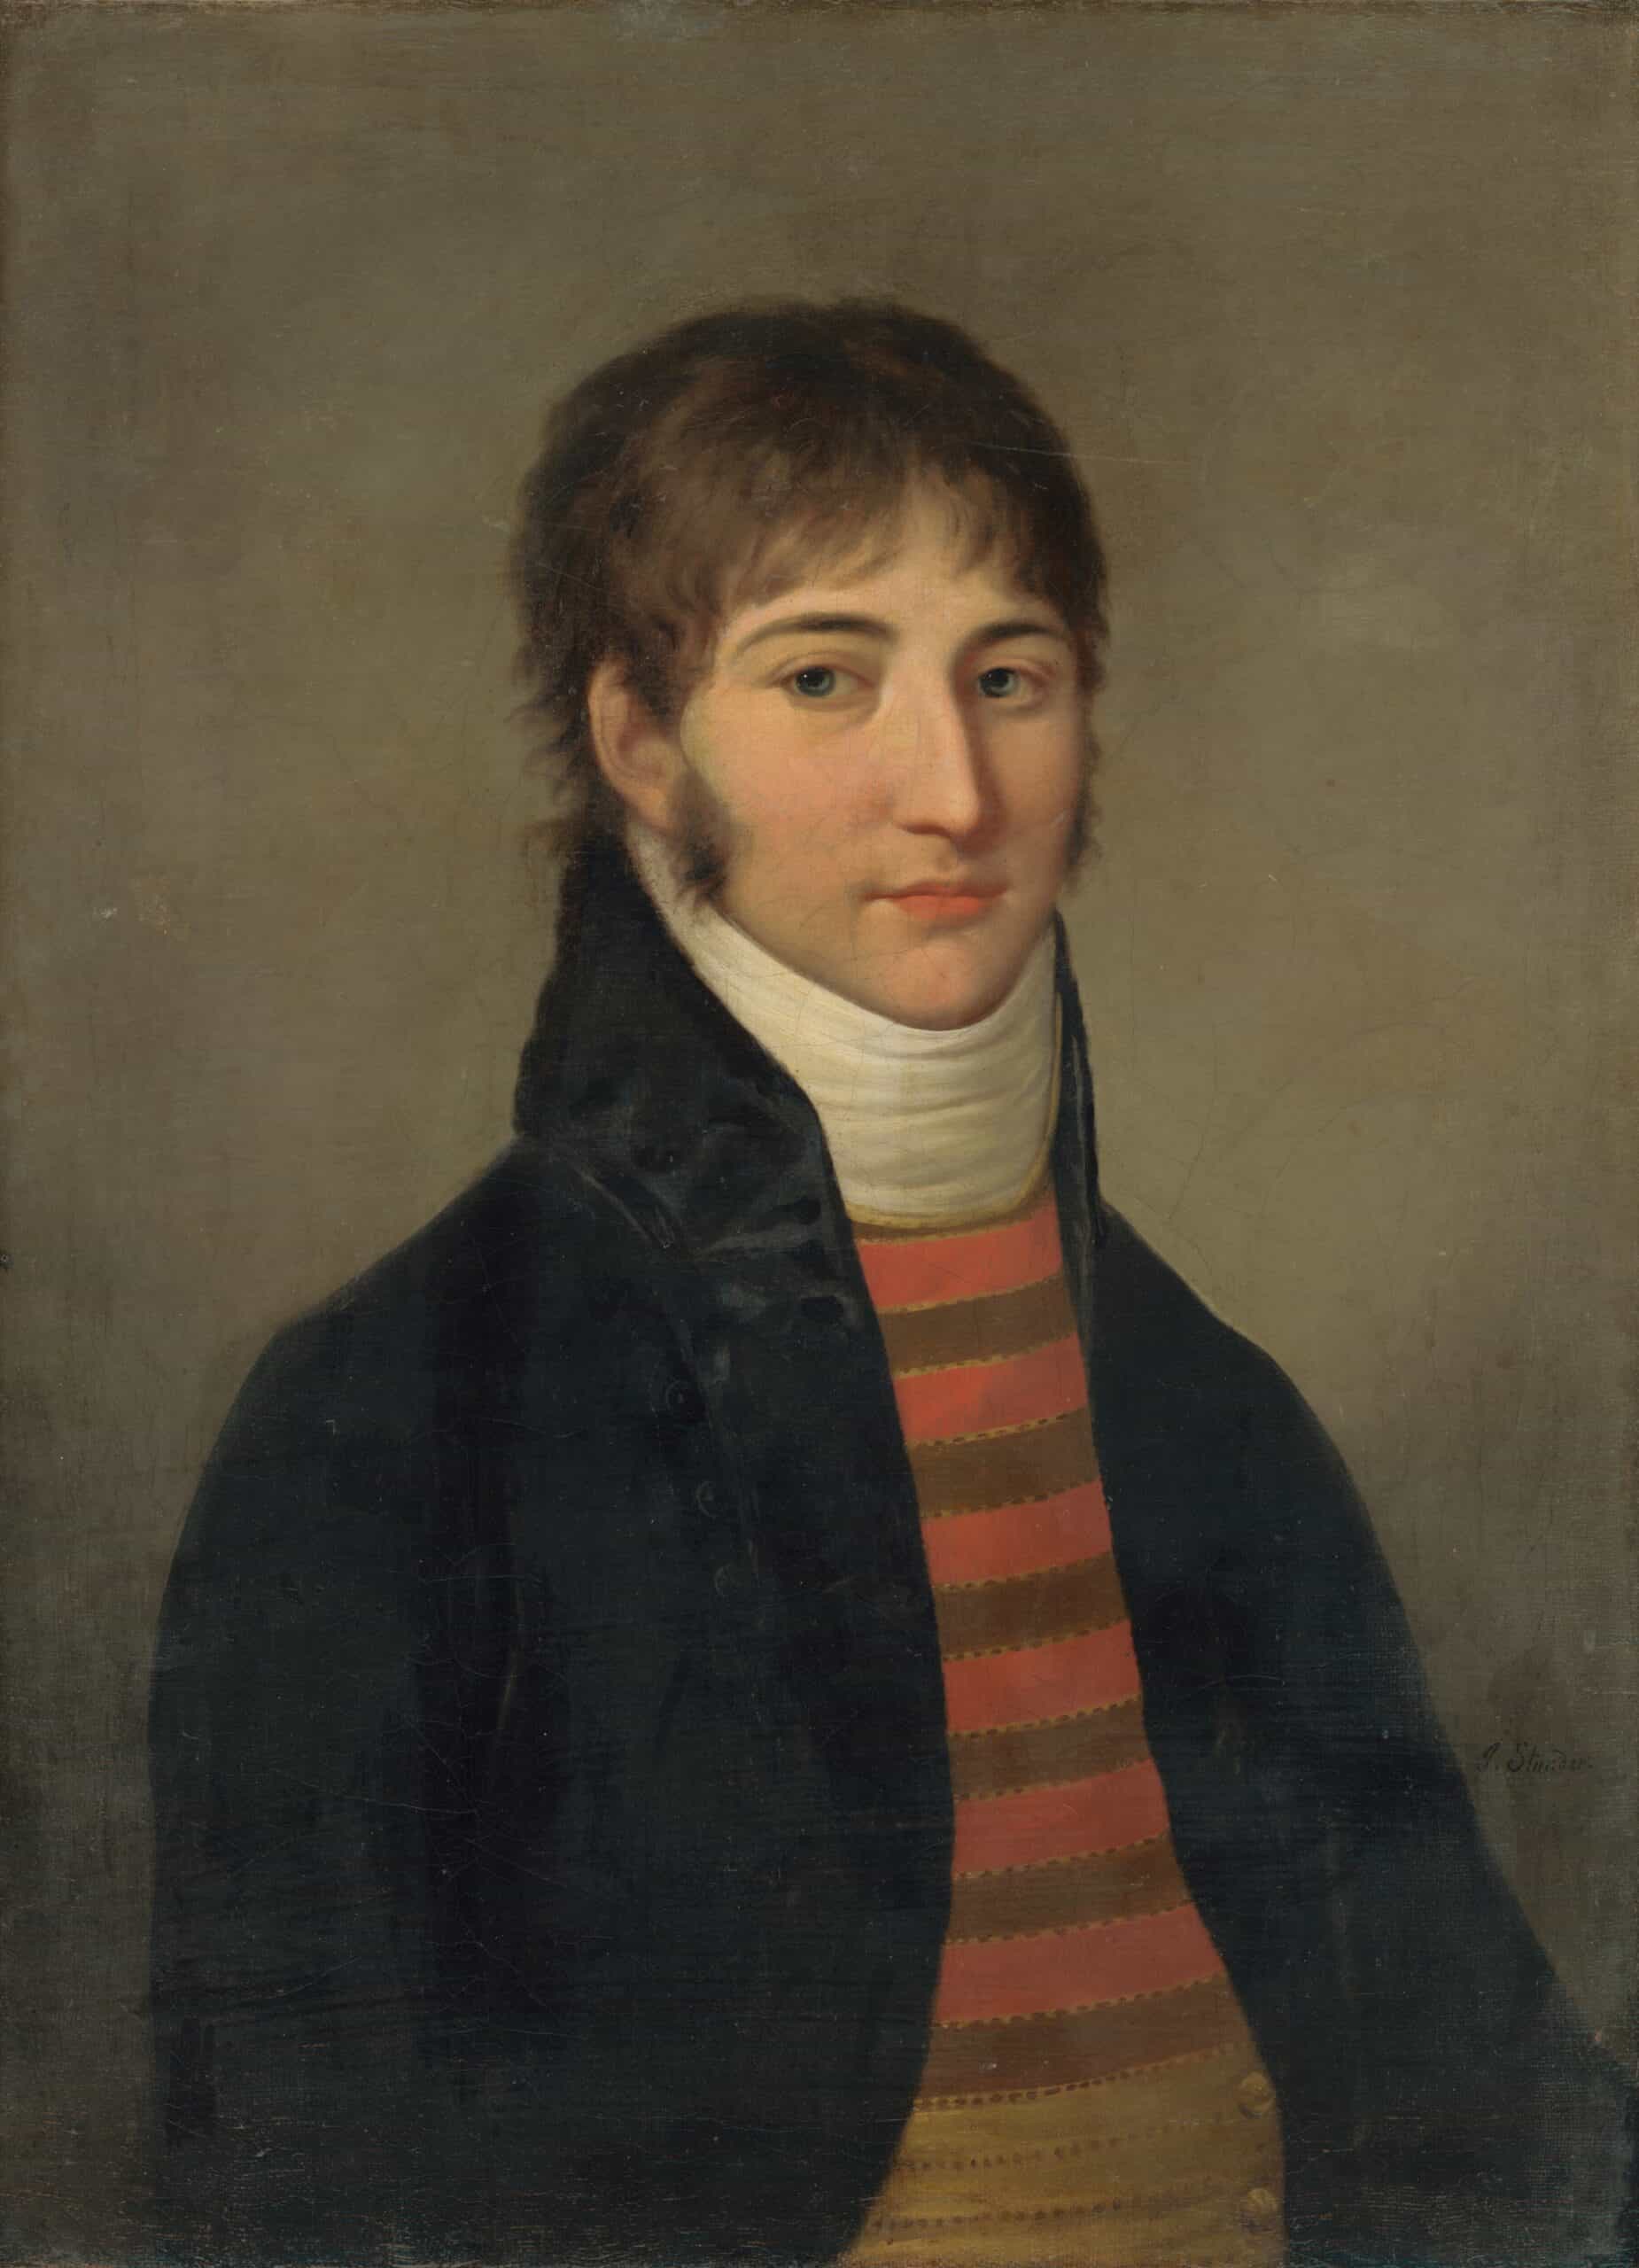 A young man in late 18th-century garb